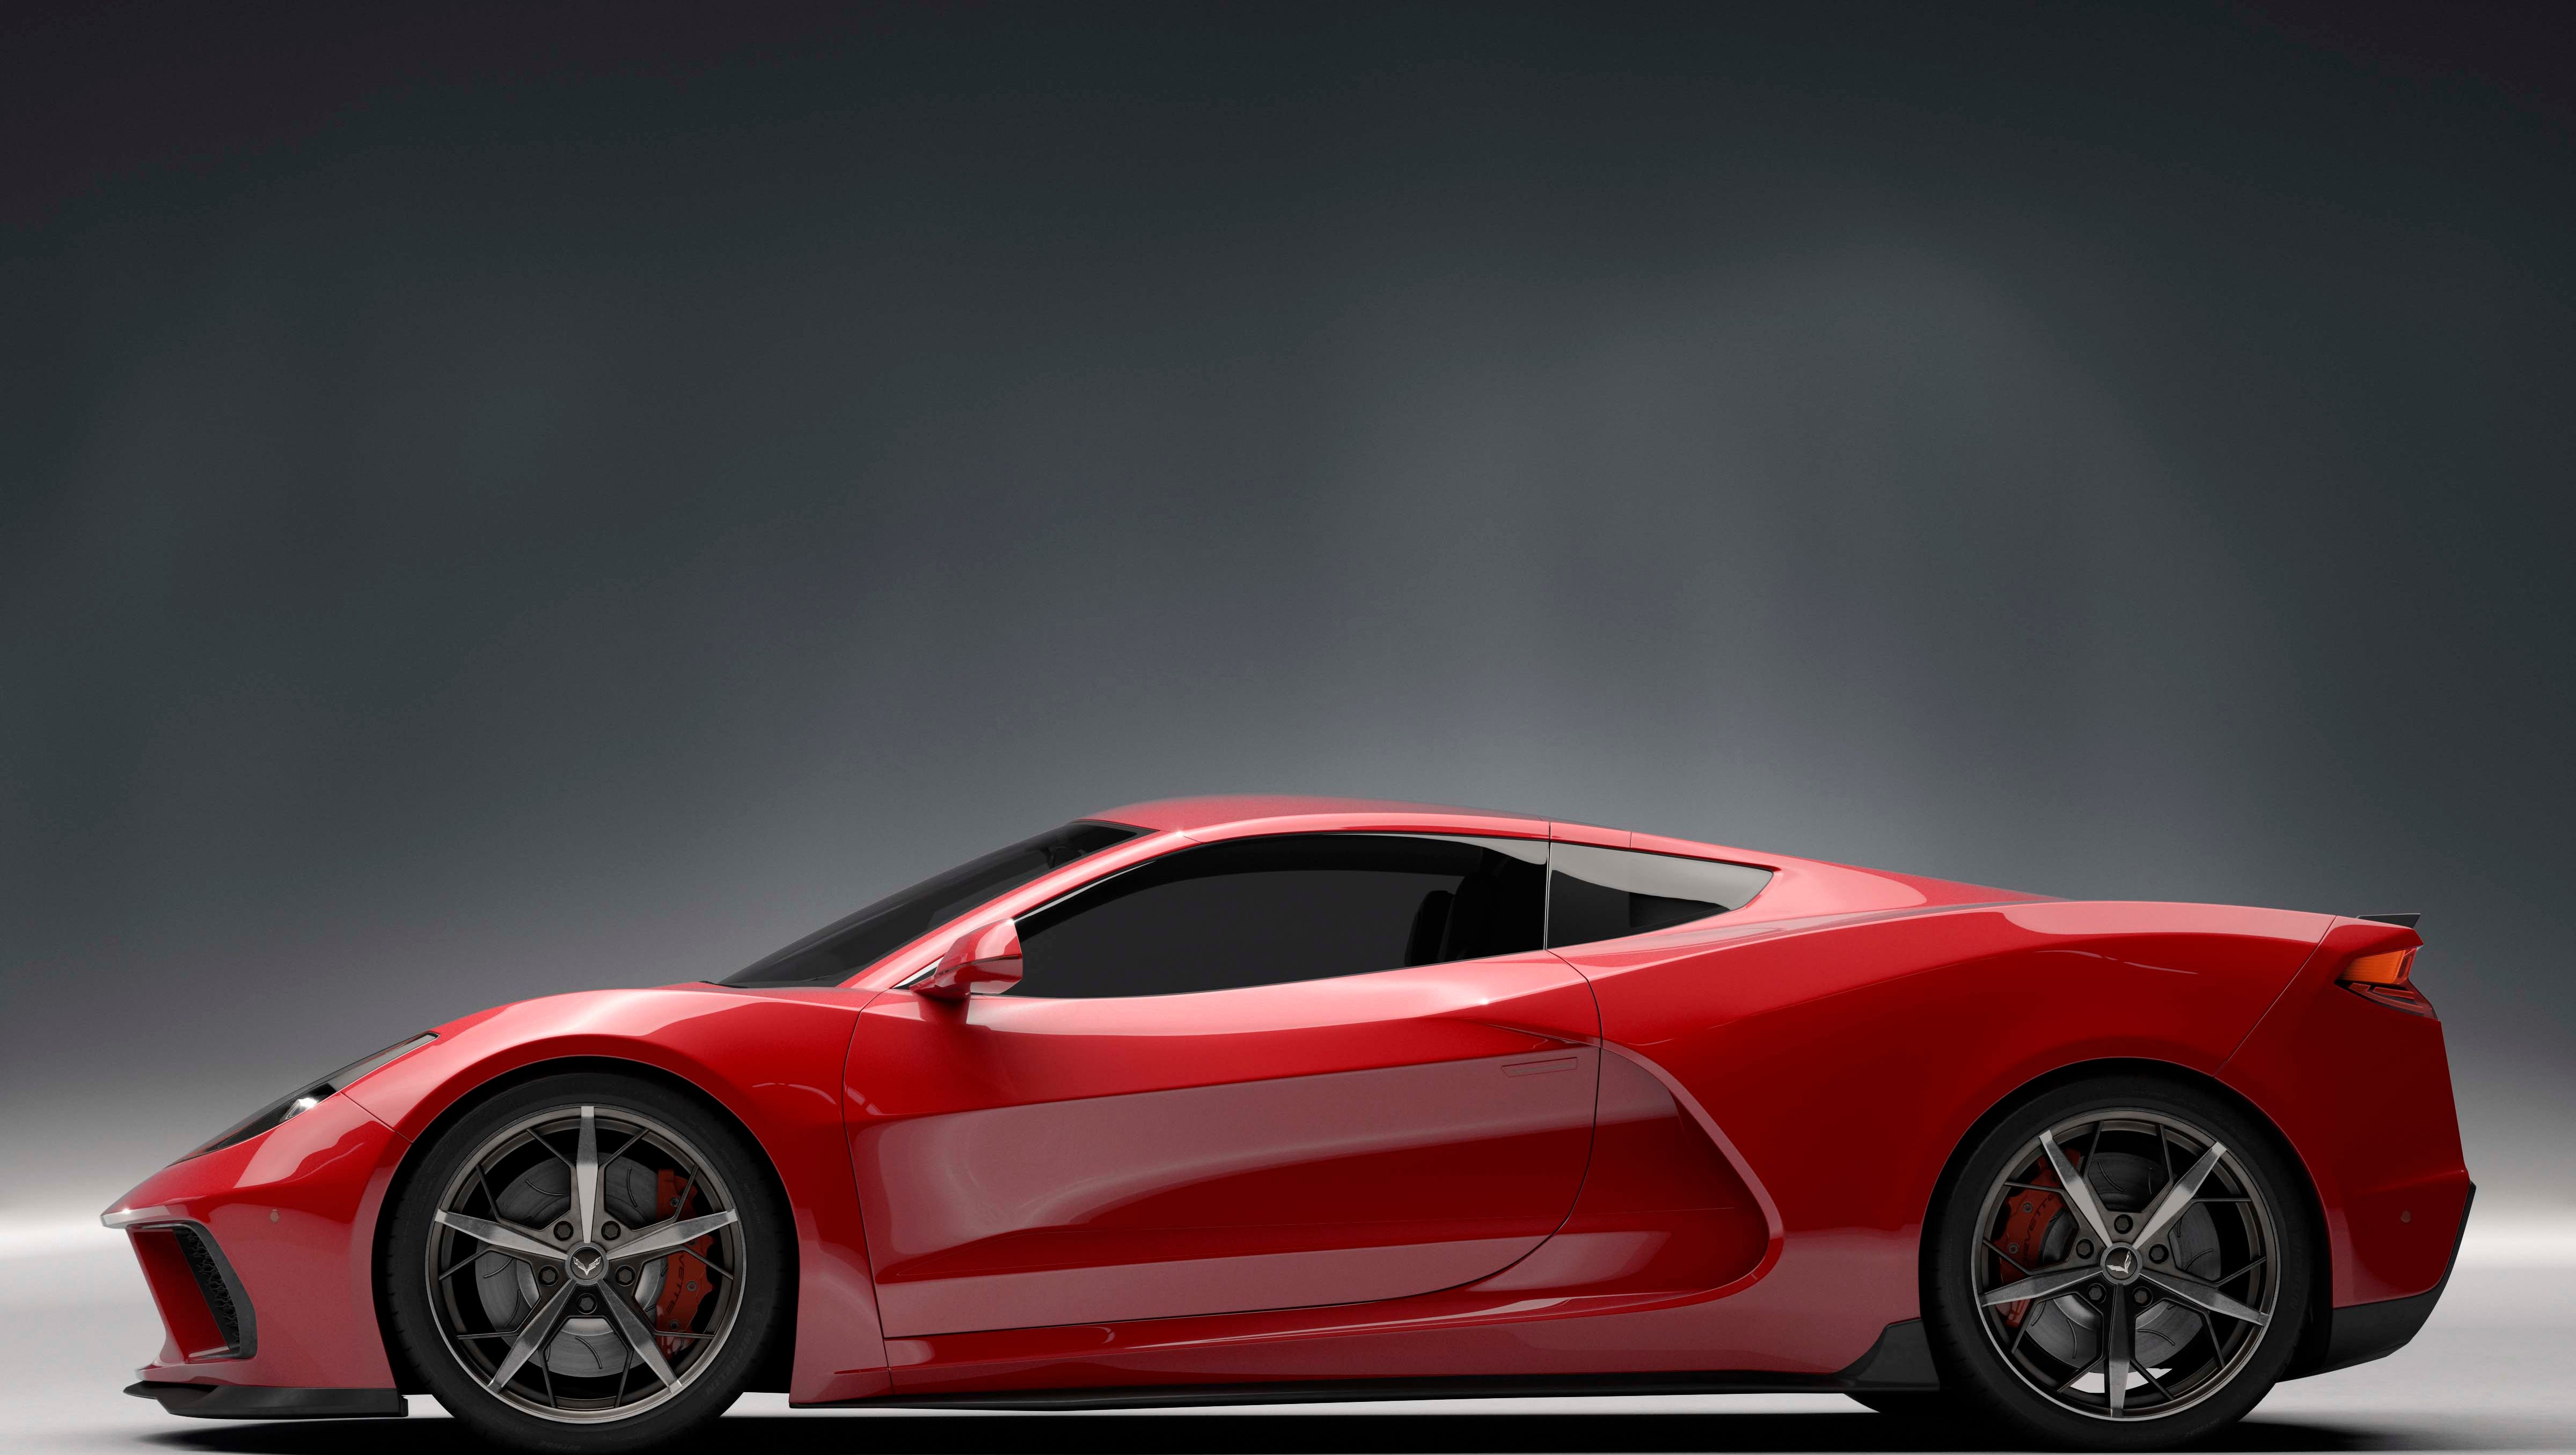 Car and Driver reports that the 2020 mid-engine Corvette C8 - seen here in an artist rendering - will feature a high-end, AWD, hybrid trim. Power will come from a twin-turbo V-8 driving the rear wheels, and a 200-horsepower motor driving the front wheels. Combined, the system will make in excess of 1000 horsepower.